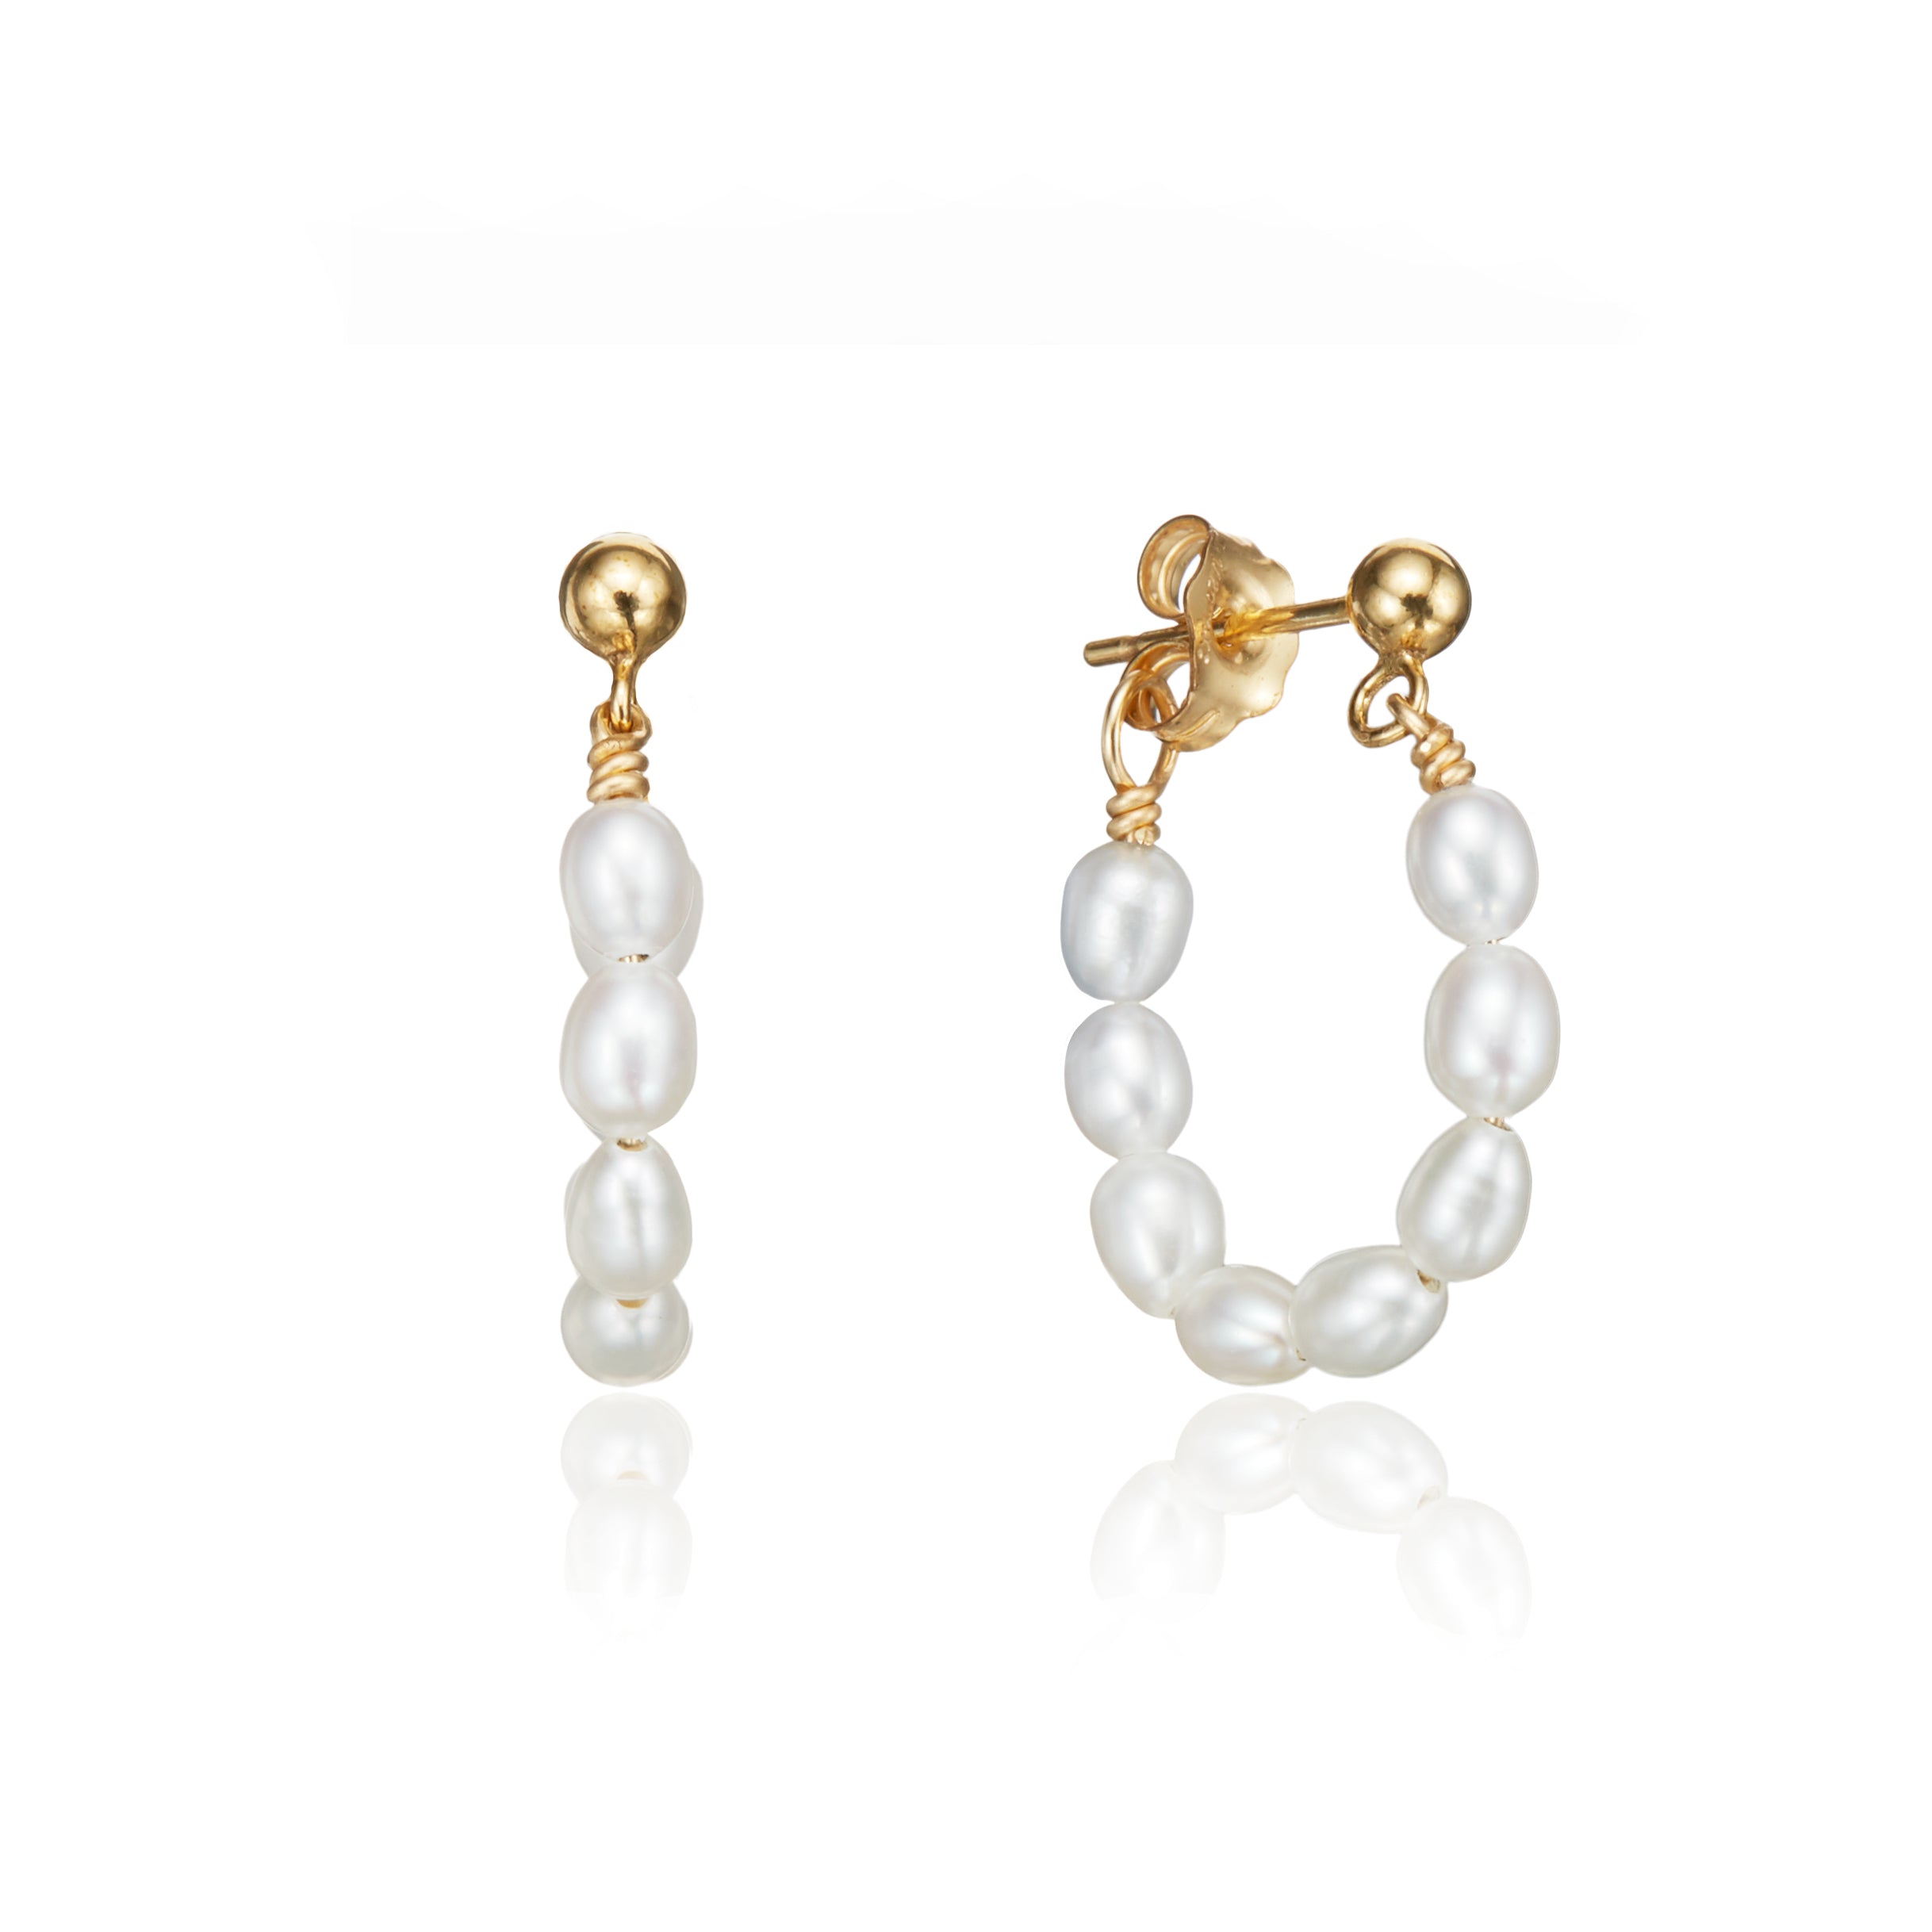 Gold seed pearl hoop earrings on a white background